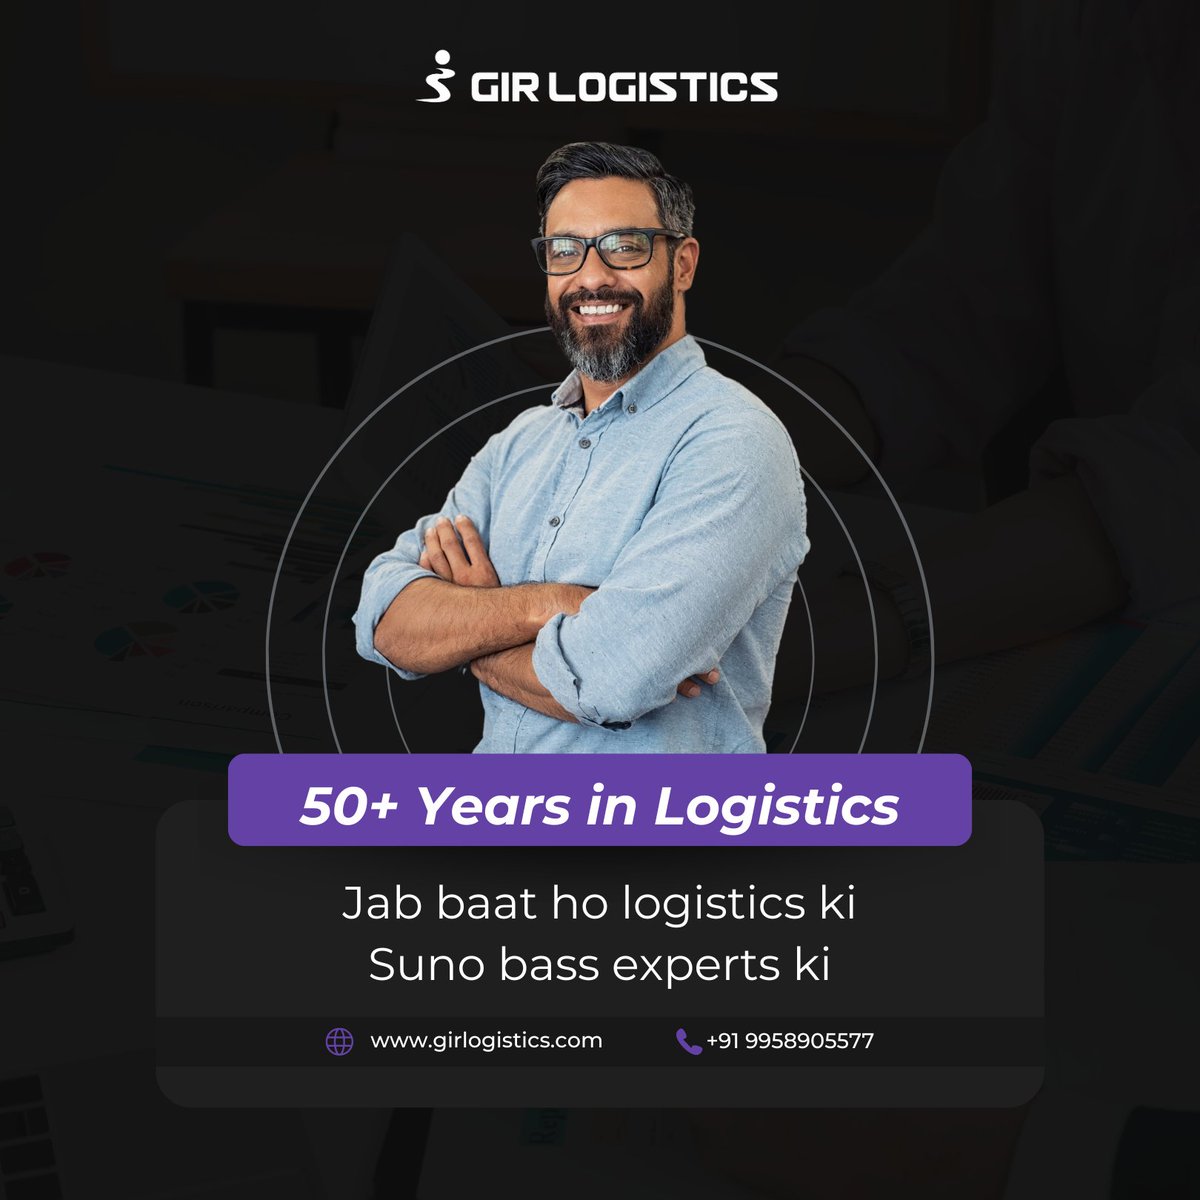 𝟓𝟎+ 𝐲𝐞𝐚𝐫𝐬 of Hard Work, Patience, and Perseverance in logistics.

#expertiselogistics #expertlogistics #logisticsservices #logisticsindia #supplychainlogistics #freightdelivery #overindiadelivery #exportcompany #freightservices #fastdelivery #OnTimeDelivery